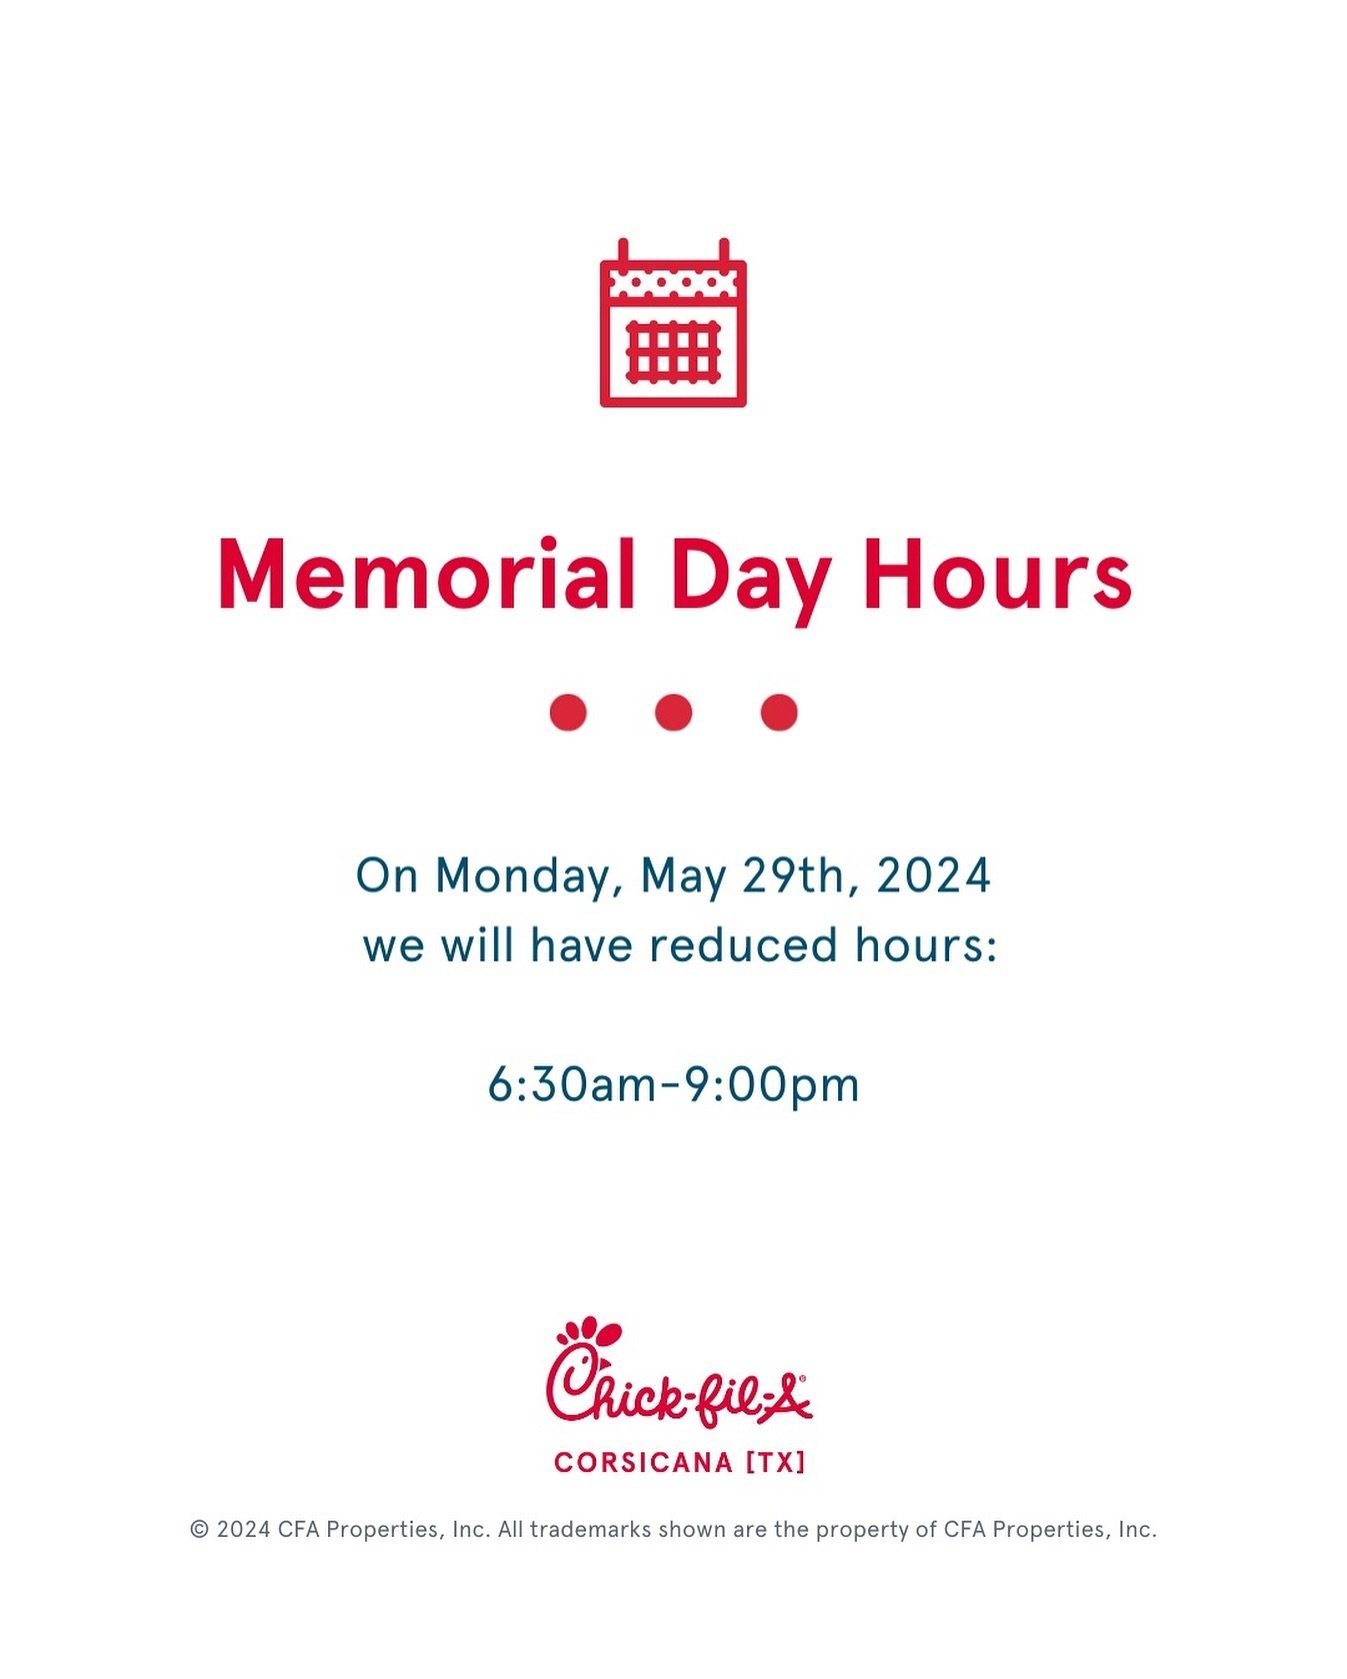 With Memorial Day just one week away, we wanted to share our special holiday hours with you. Please take note of our adjusted schedule so you can plan your visit accordingly. 

We look forward to serving you!❤️